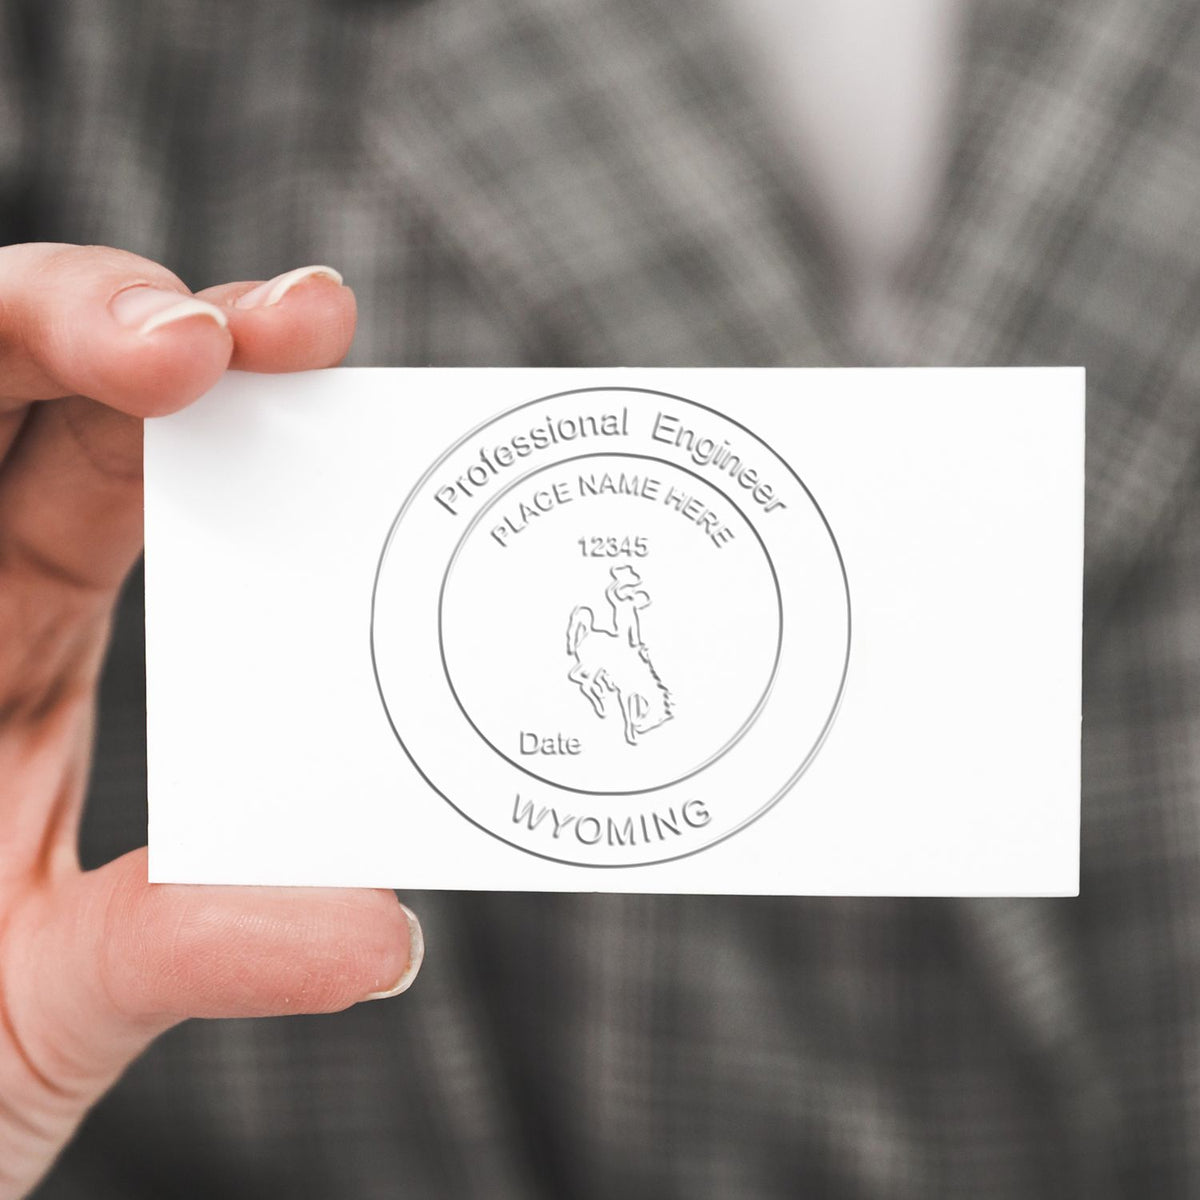 This paper is stamped with a sample imprint of the Soft Wyoming Professional Engineer Seal, signifying its quality and reliability.